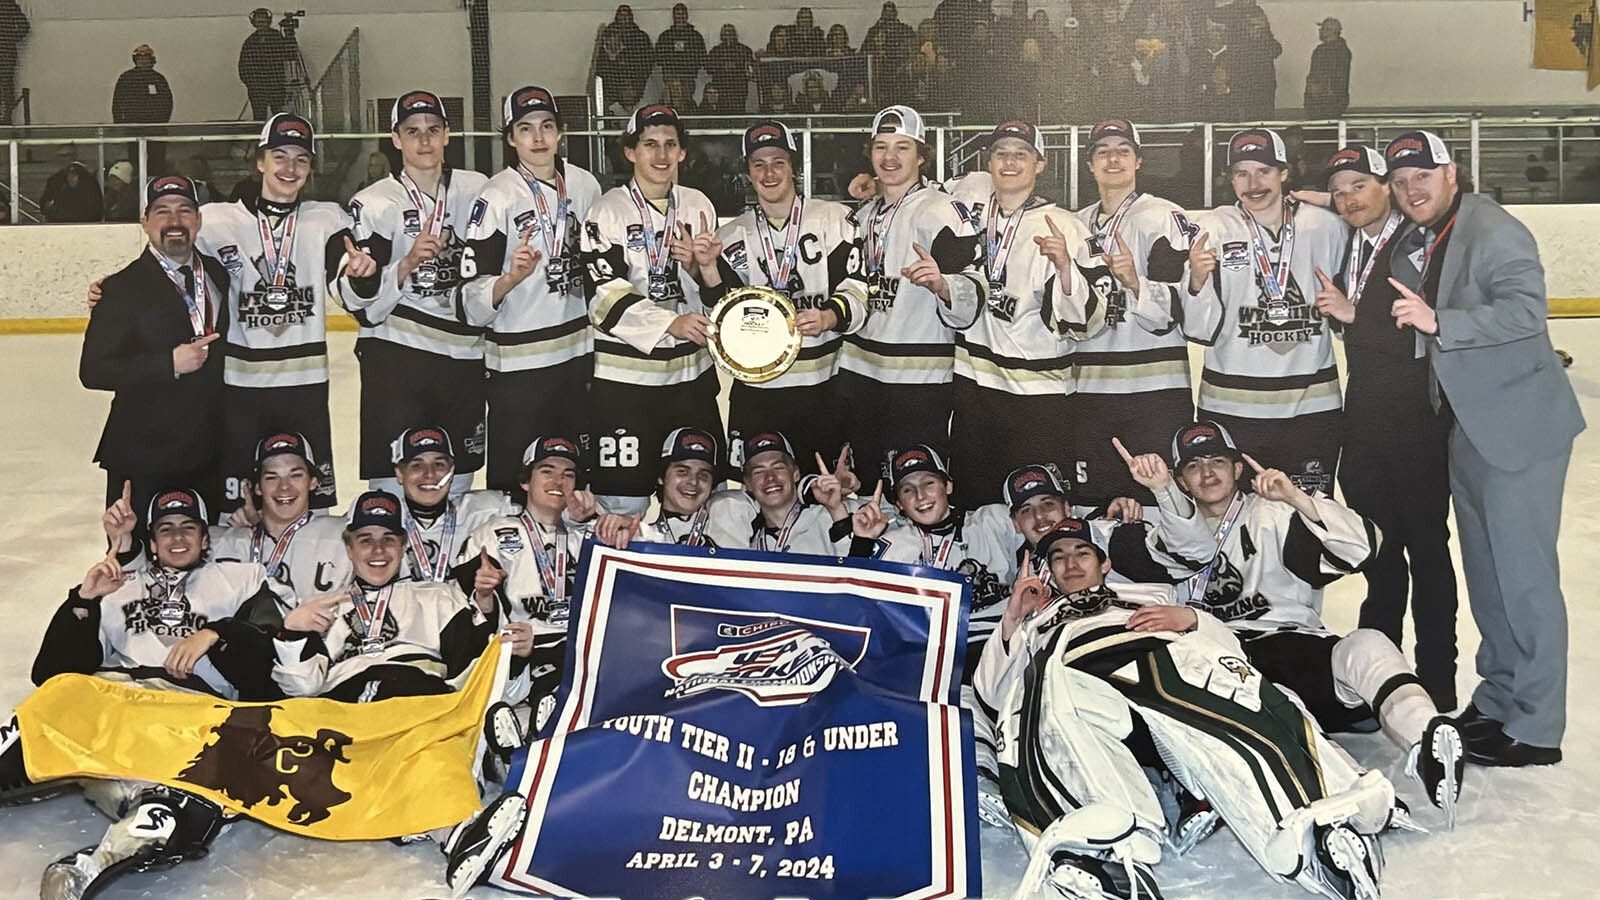 Team Wyoming’s 18U AA team became the first national champions at their age level for the state.